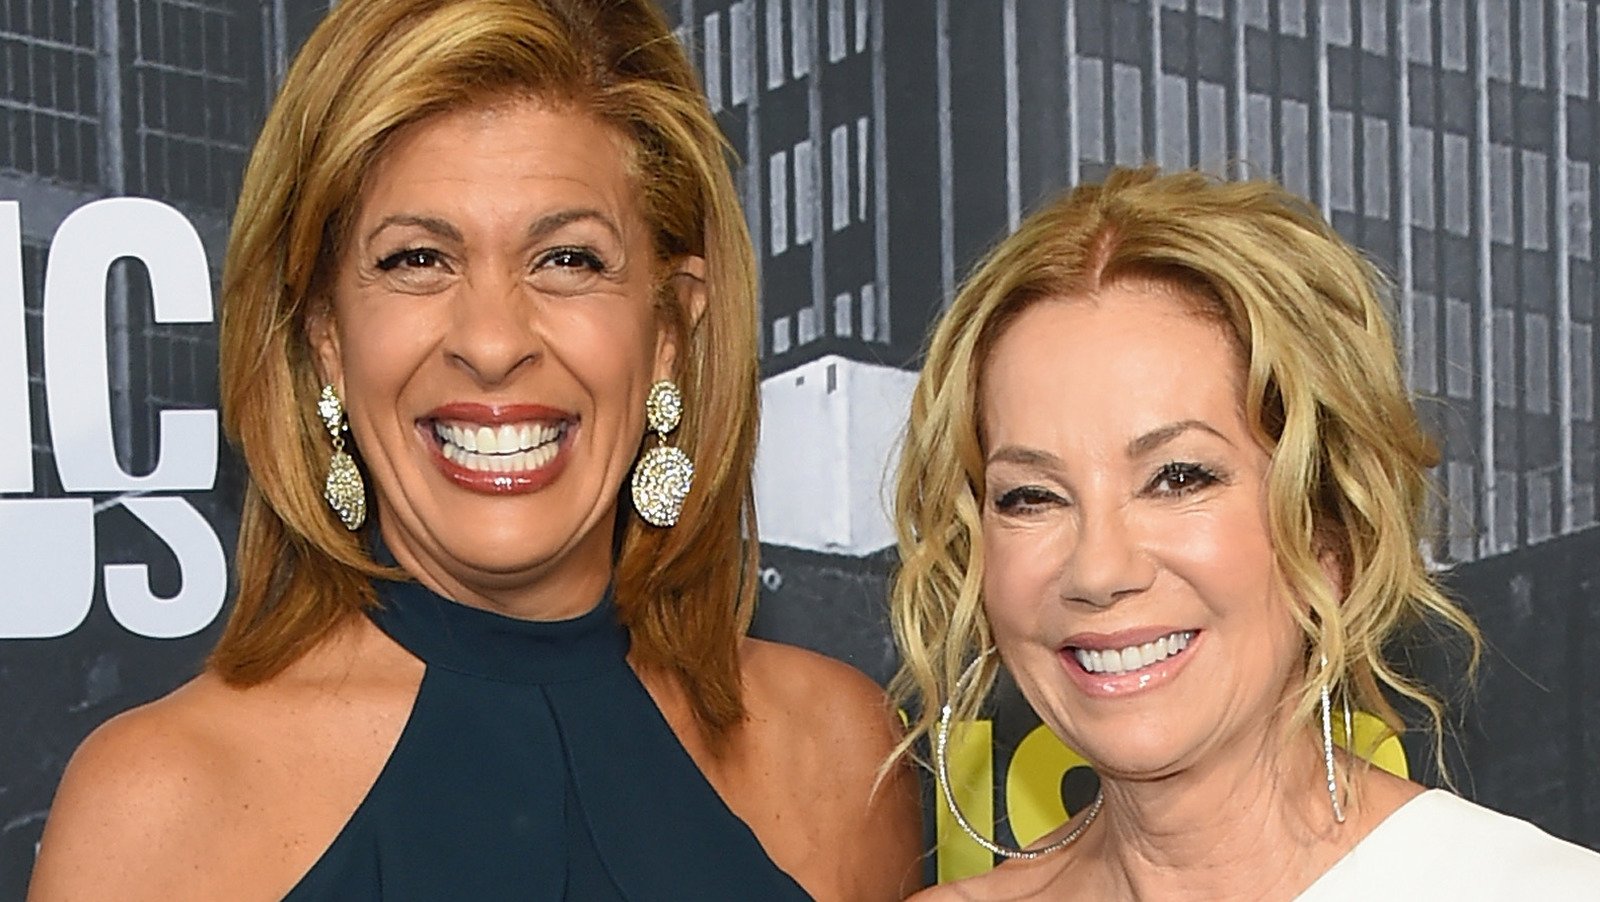 A Look Into Kathie Lee Gifford And Hoda Kotb's Relationship